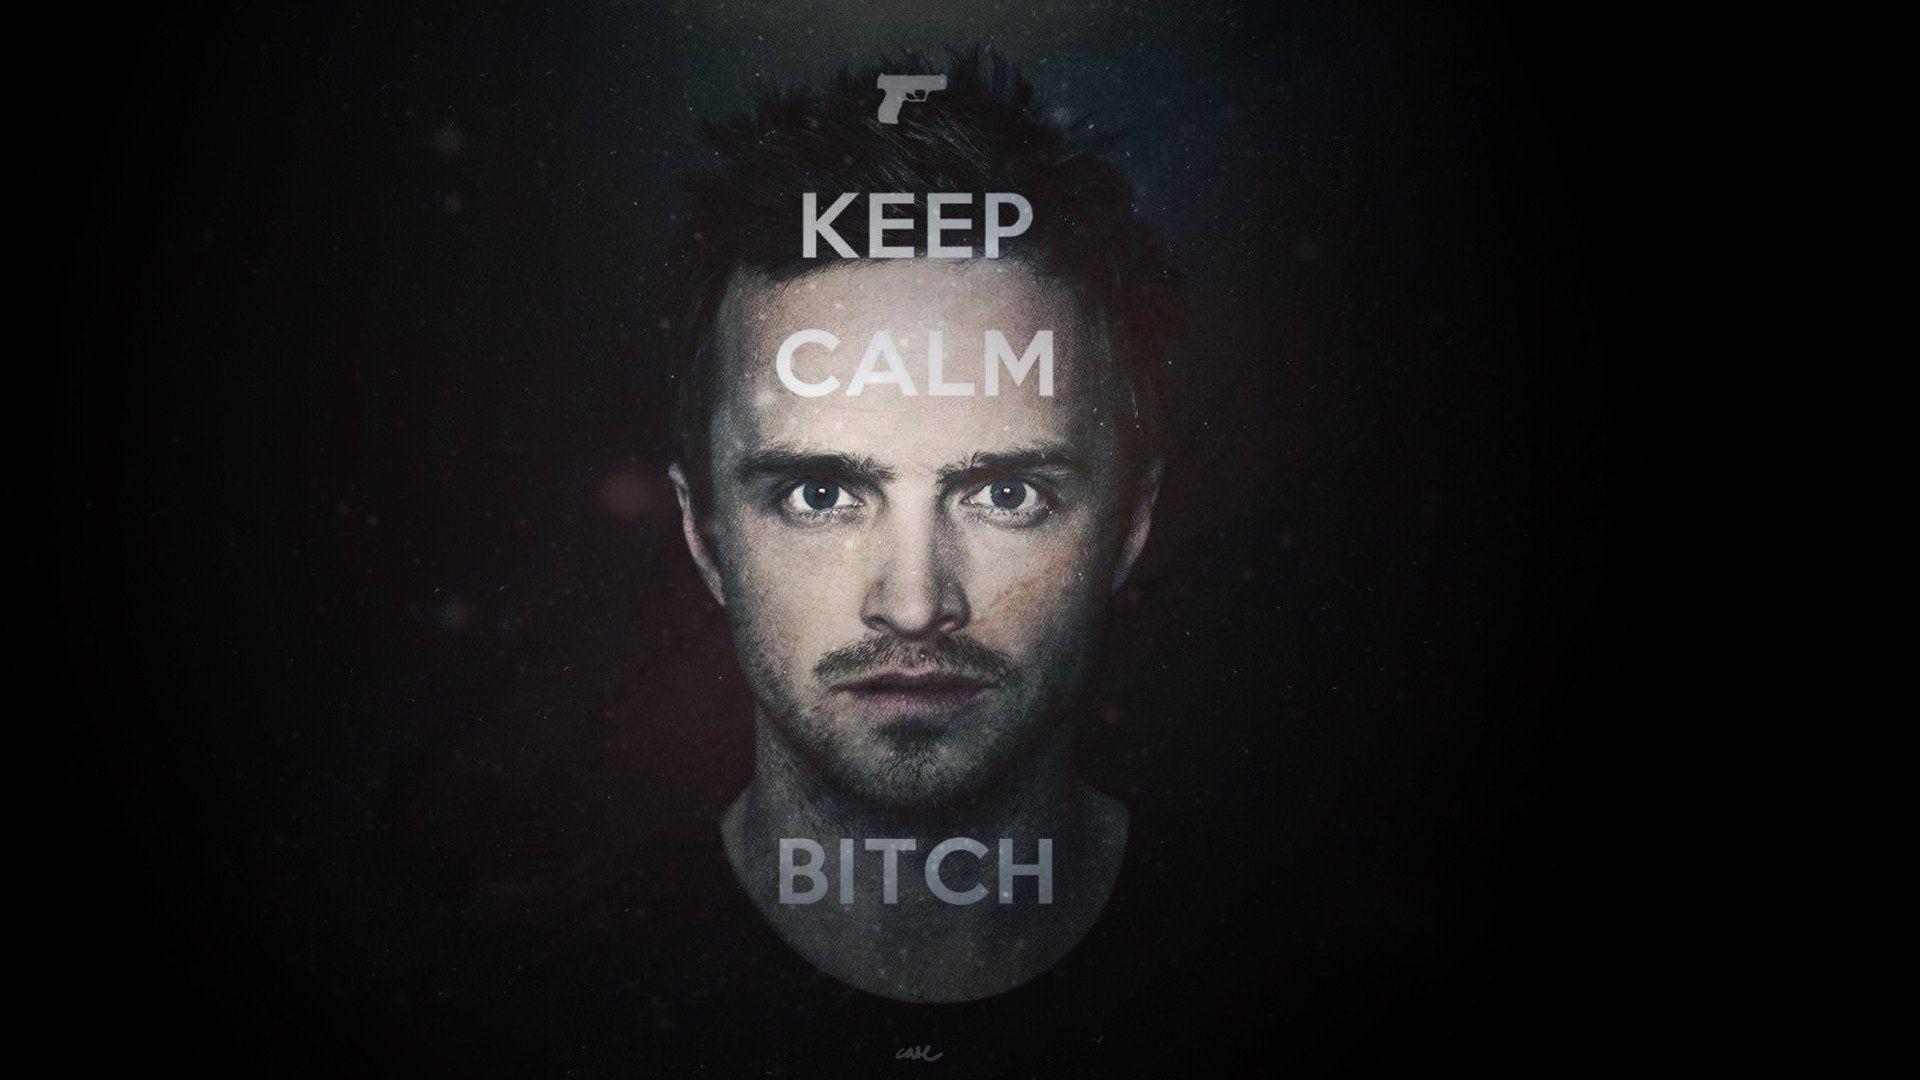 Breaking Bad Wallpapers All Hail The King Wallpaper Cave